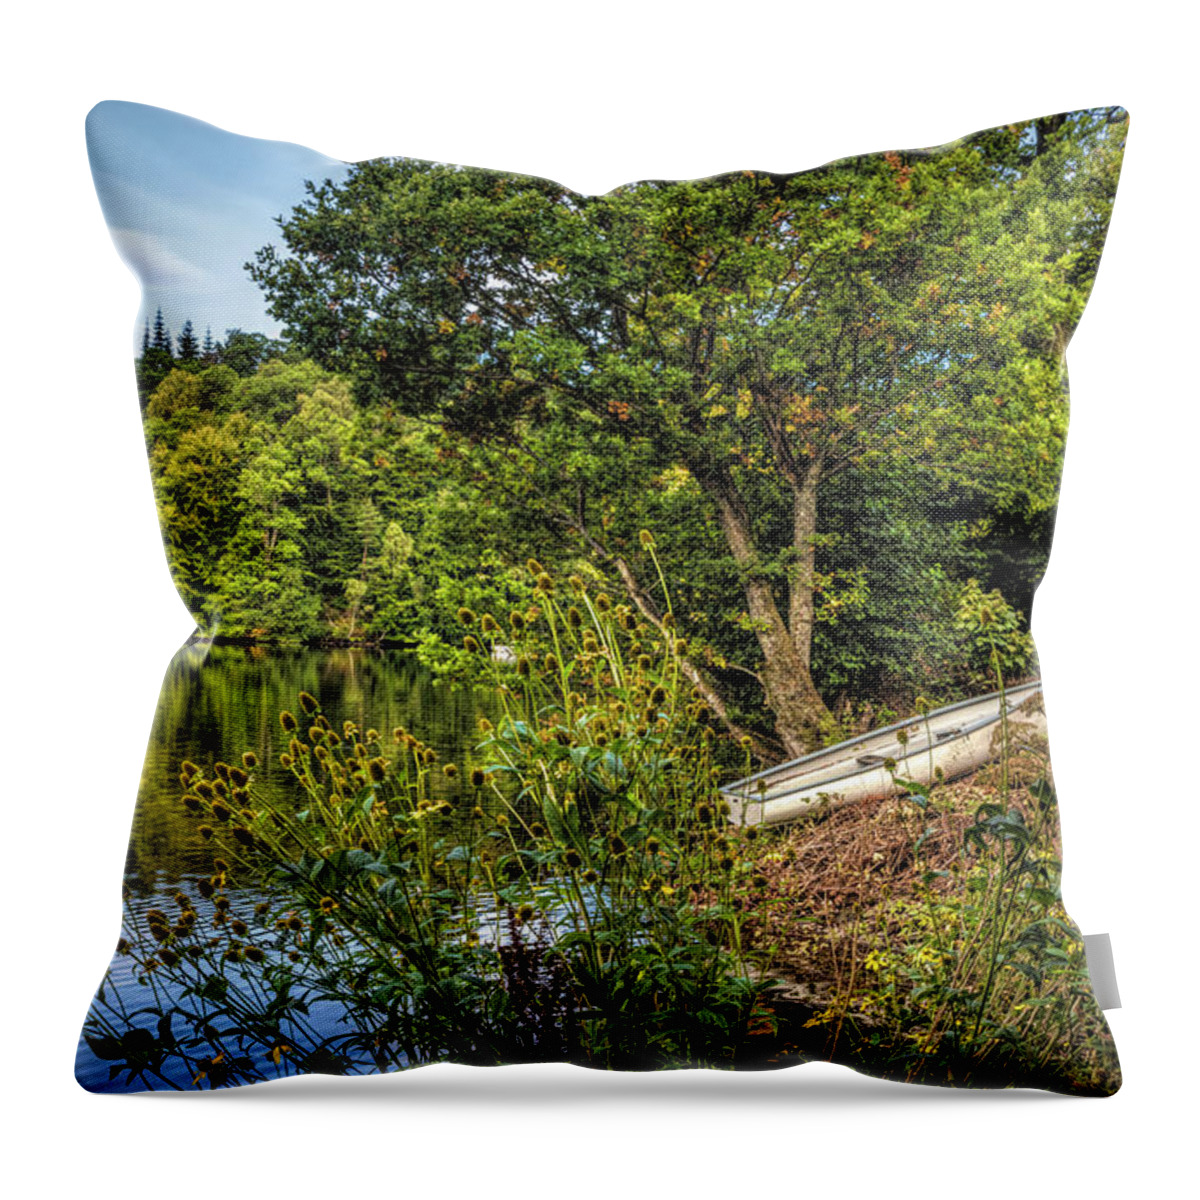 Boats Throw Pillow featuring the photograph Rowboat in Early Autumn by Debra and Dave Vanderlaan